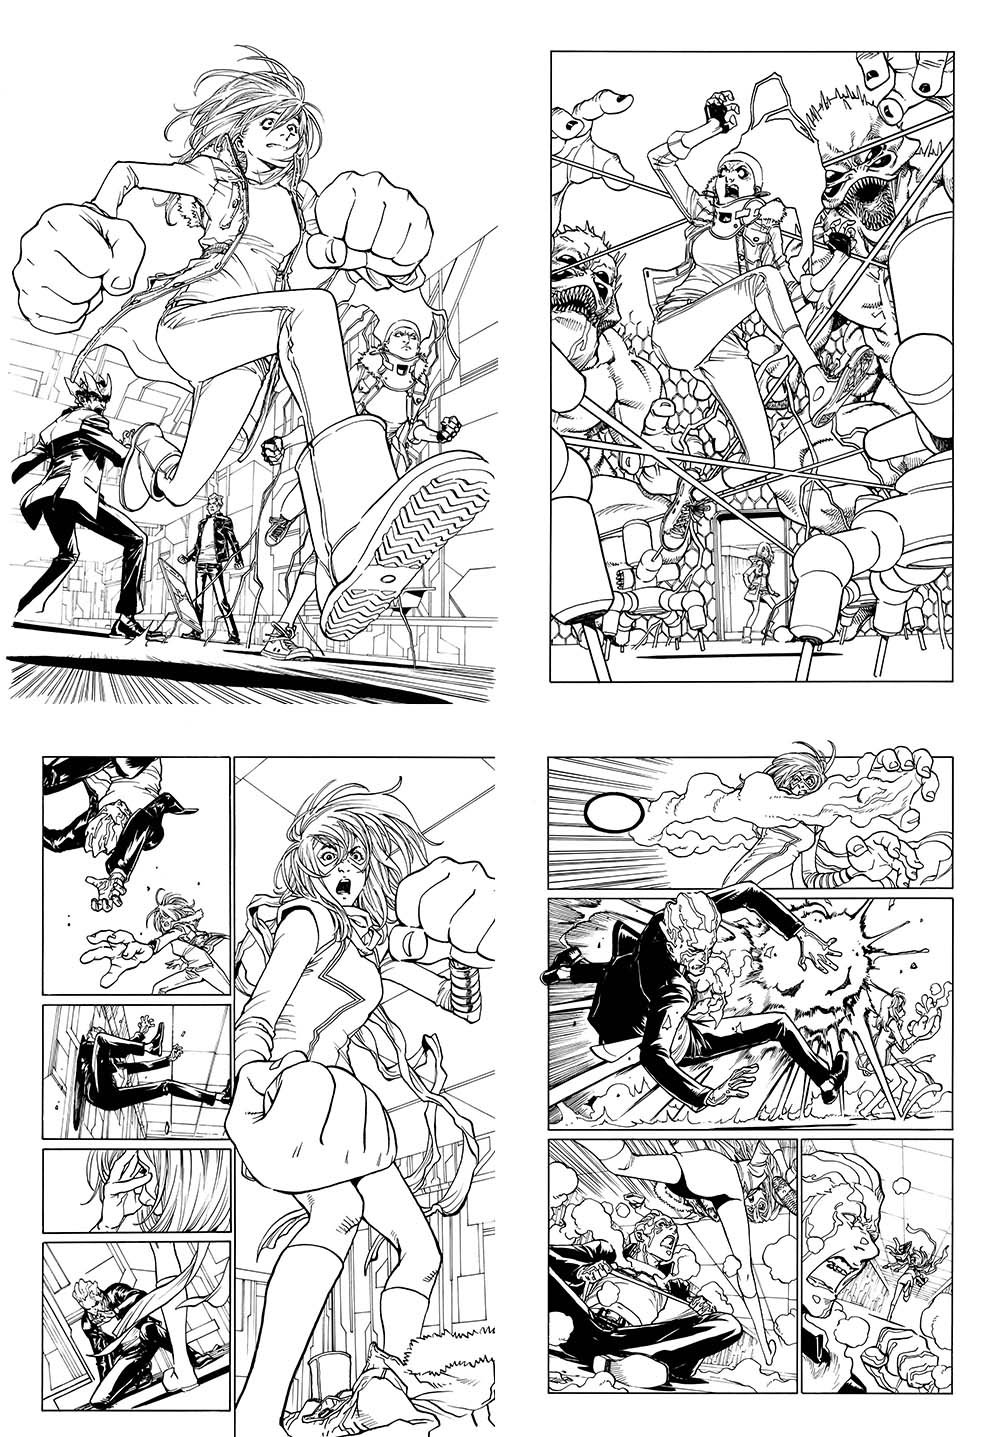 Image of Ms Marvel 15: Complete 20 Page Set